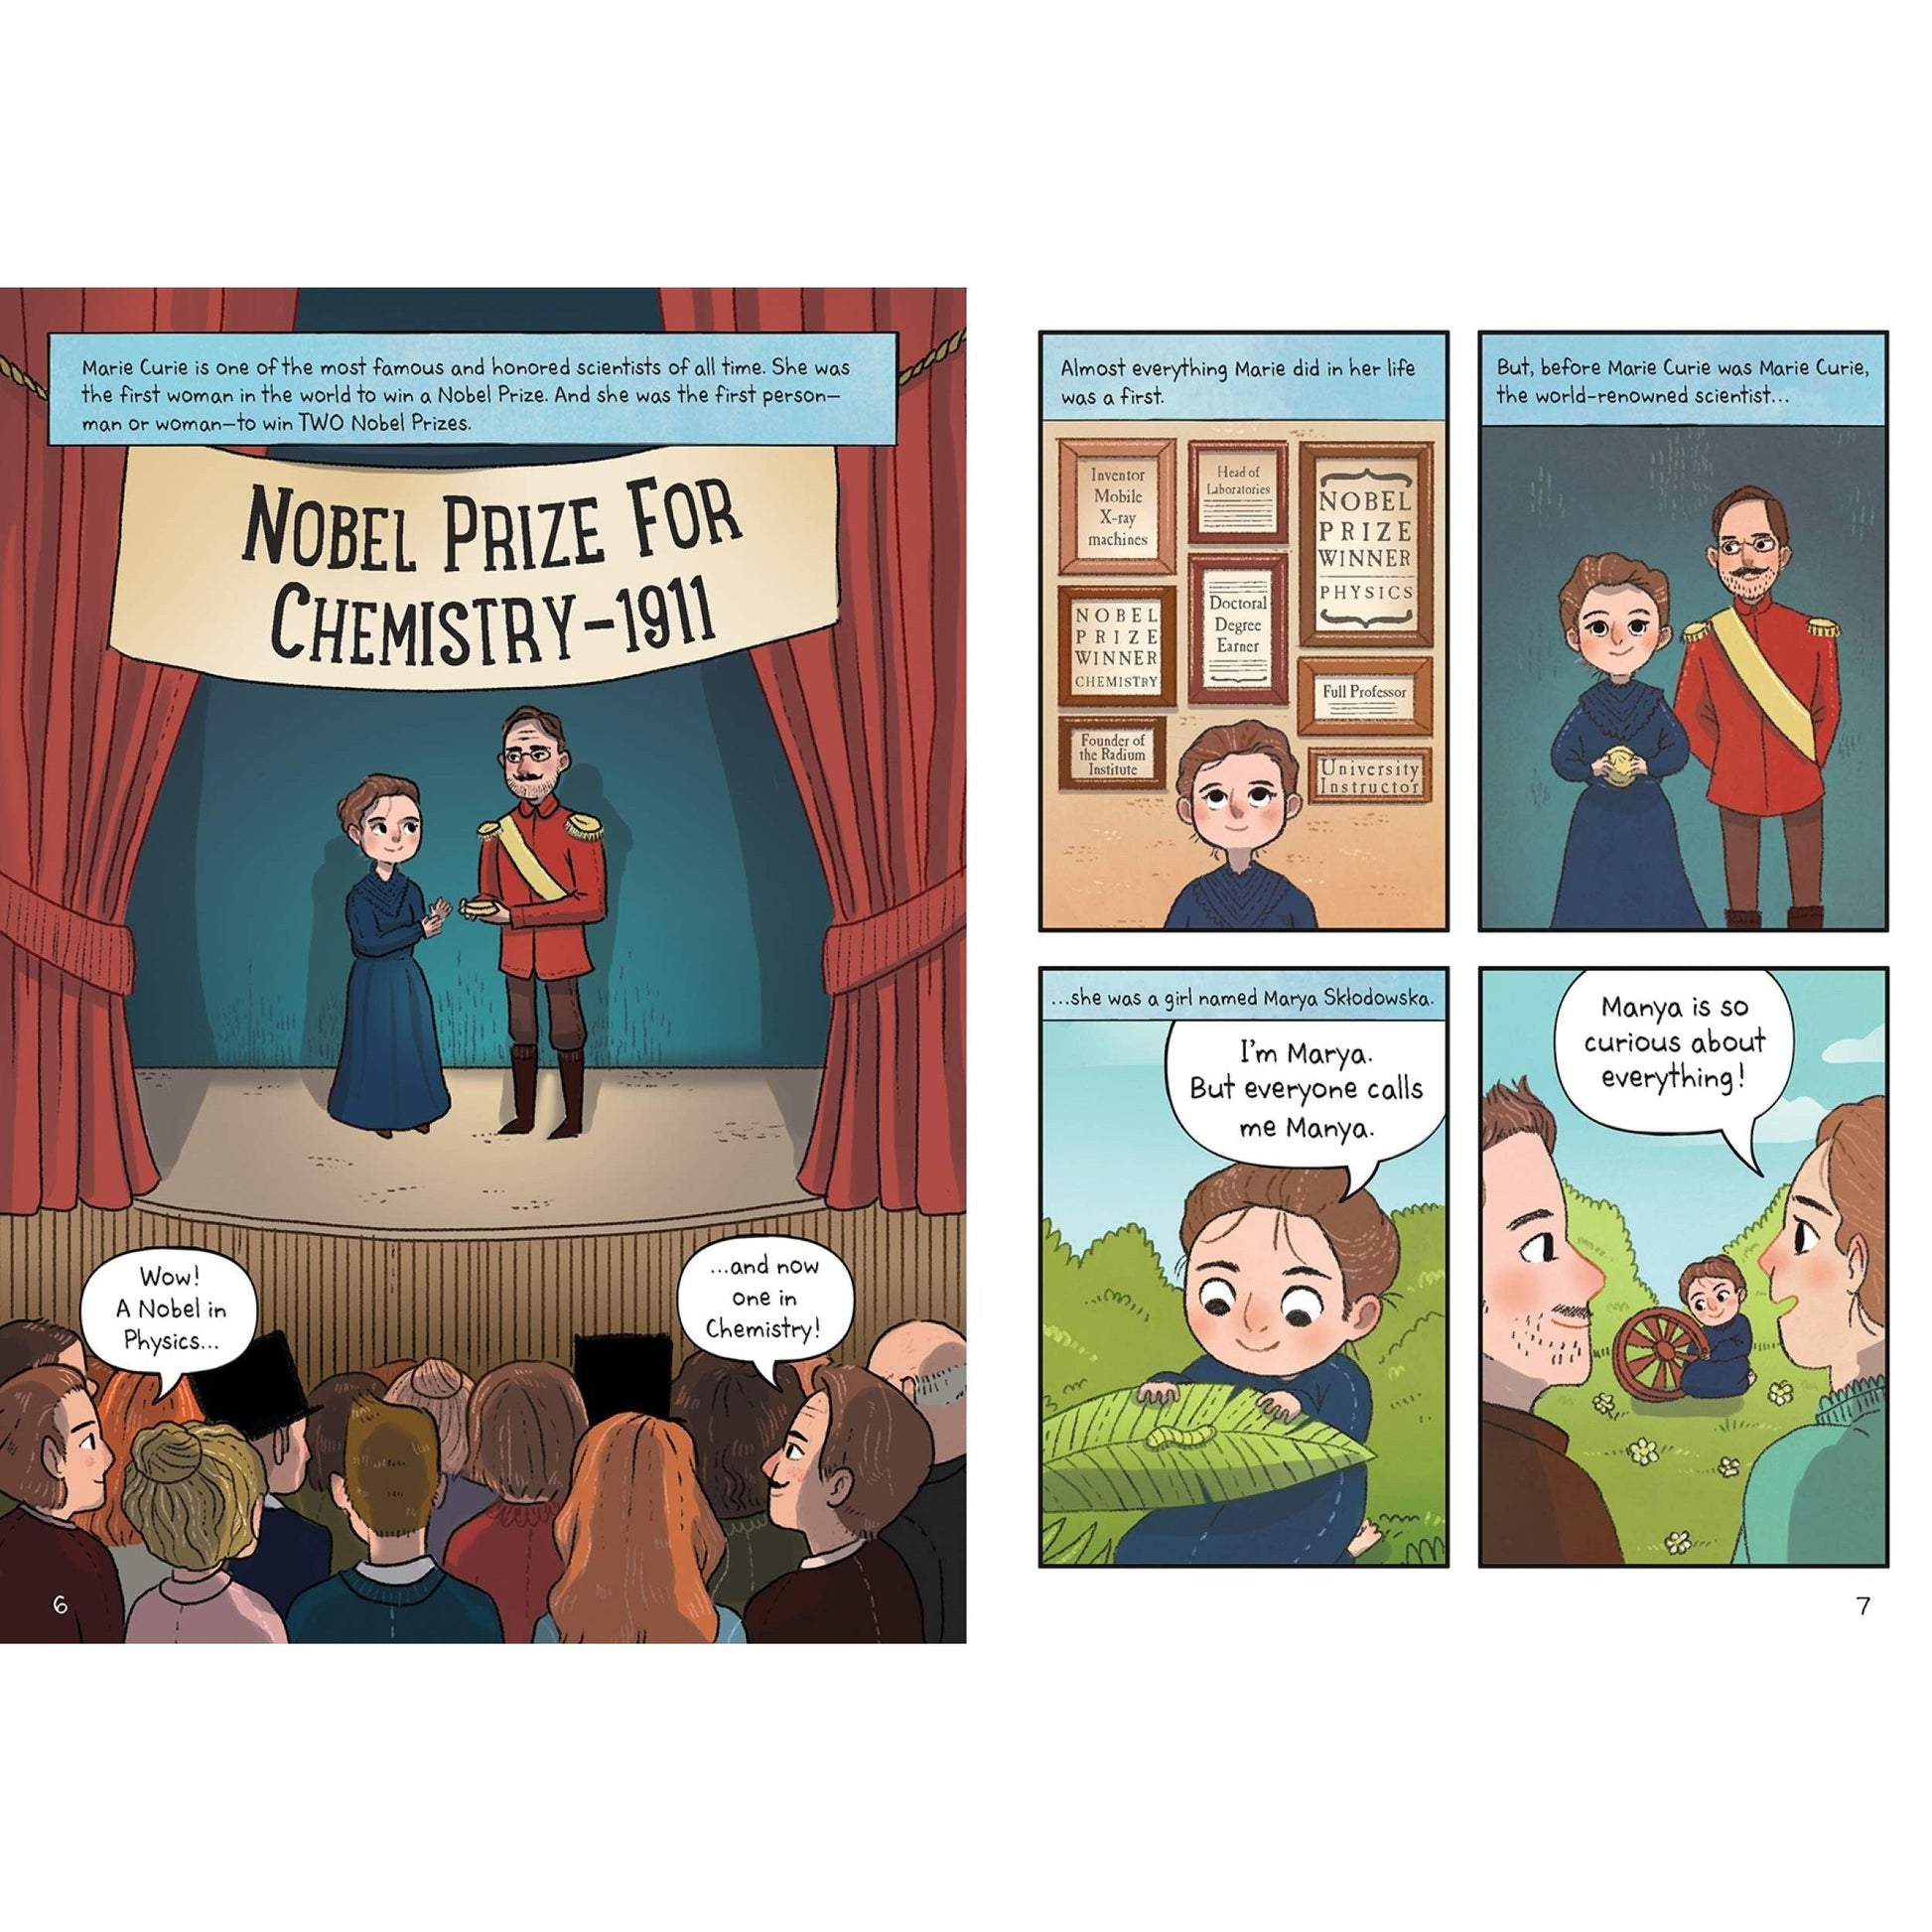 Marie Curie Graphic Novel OP